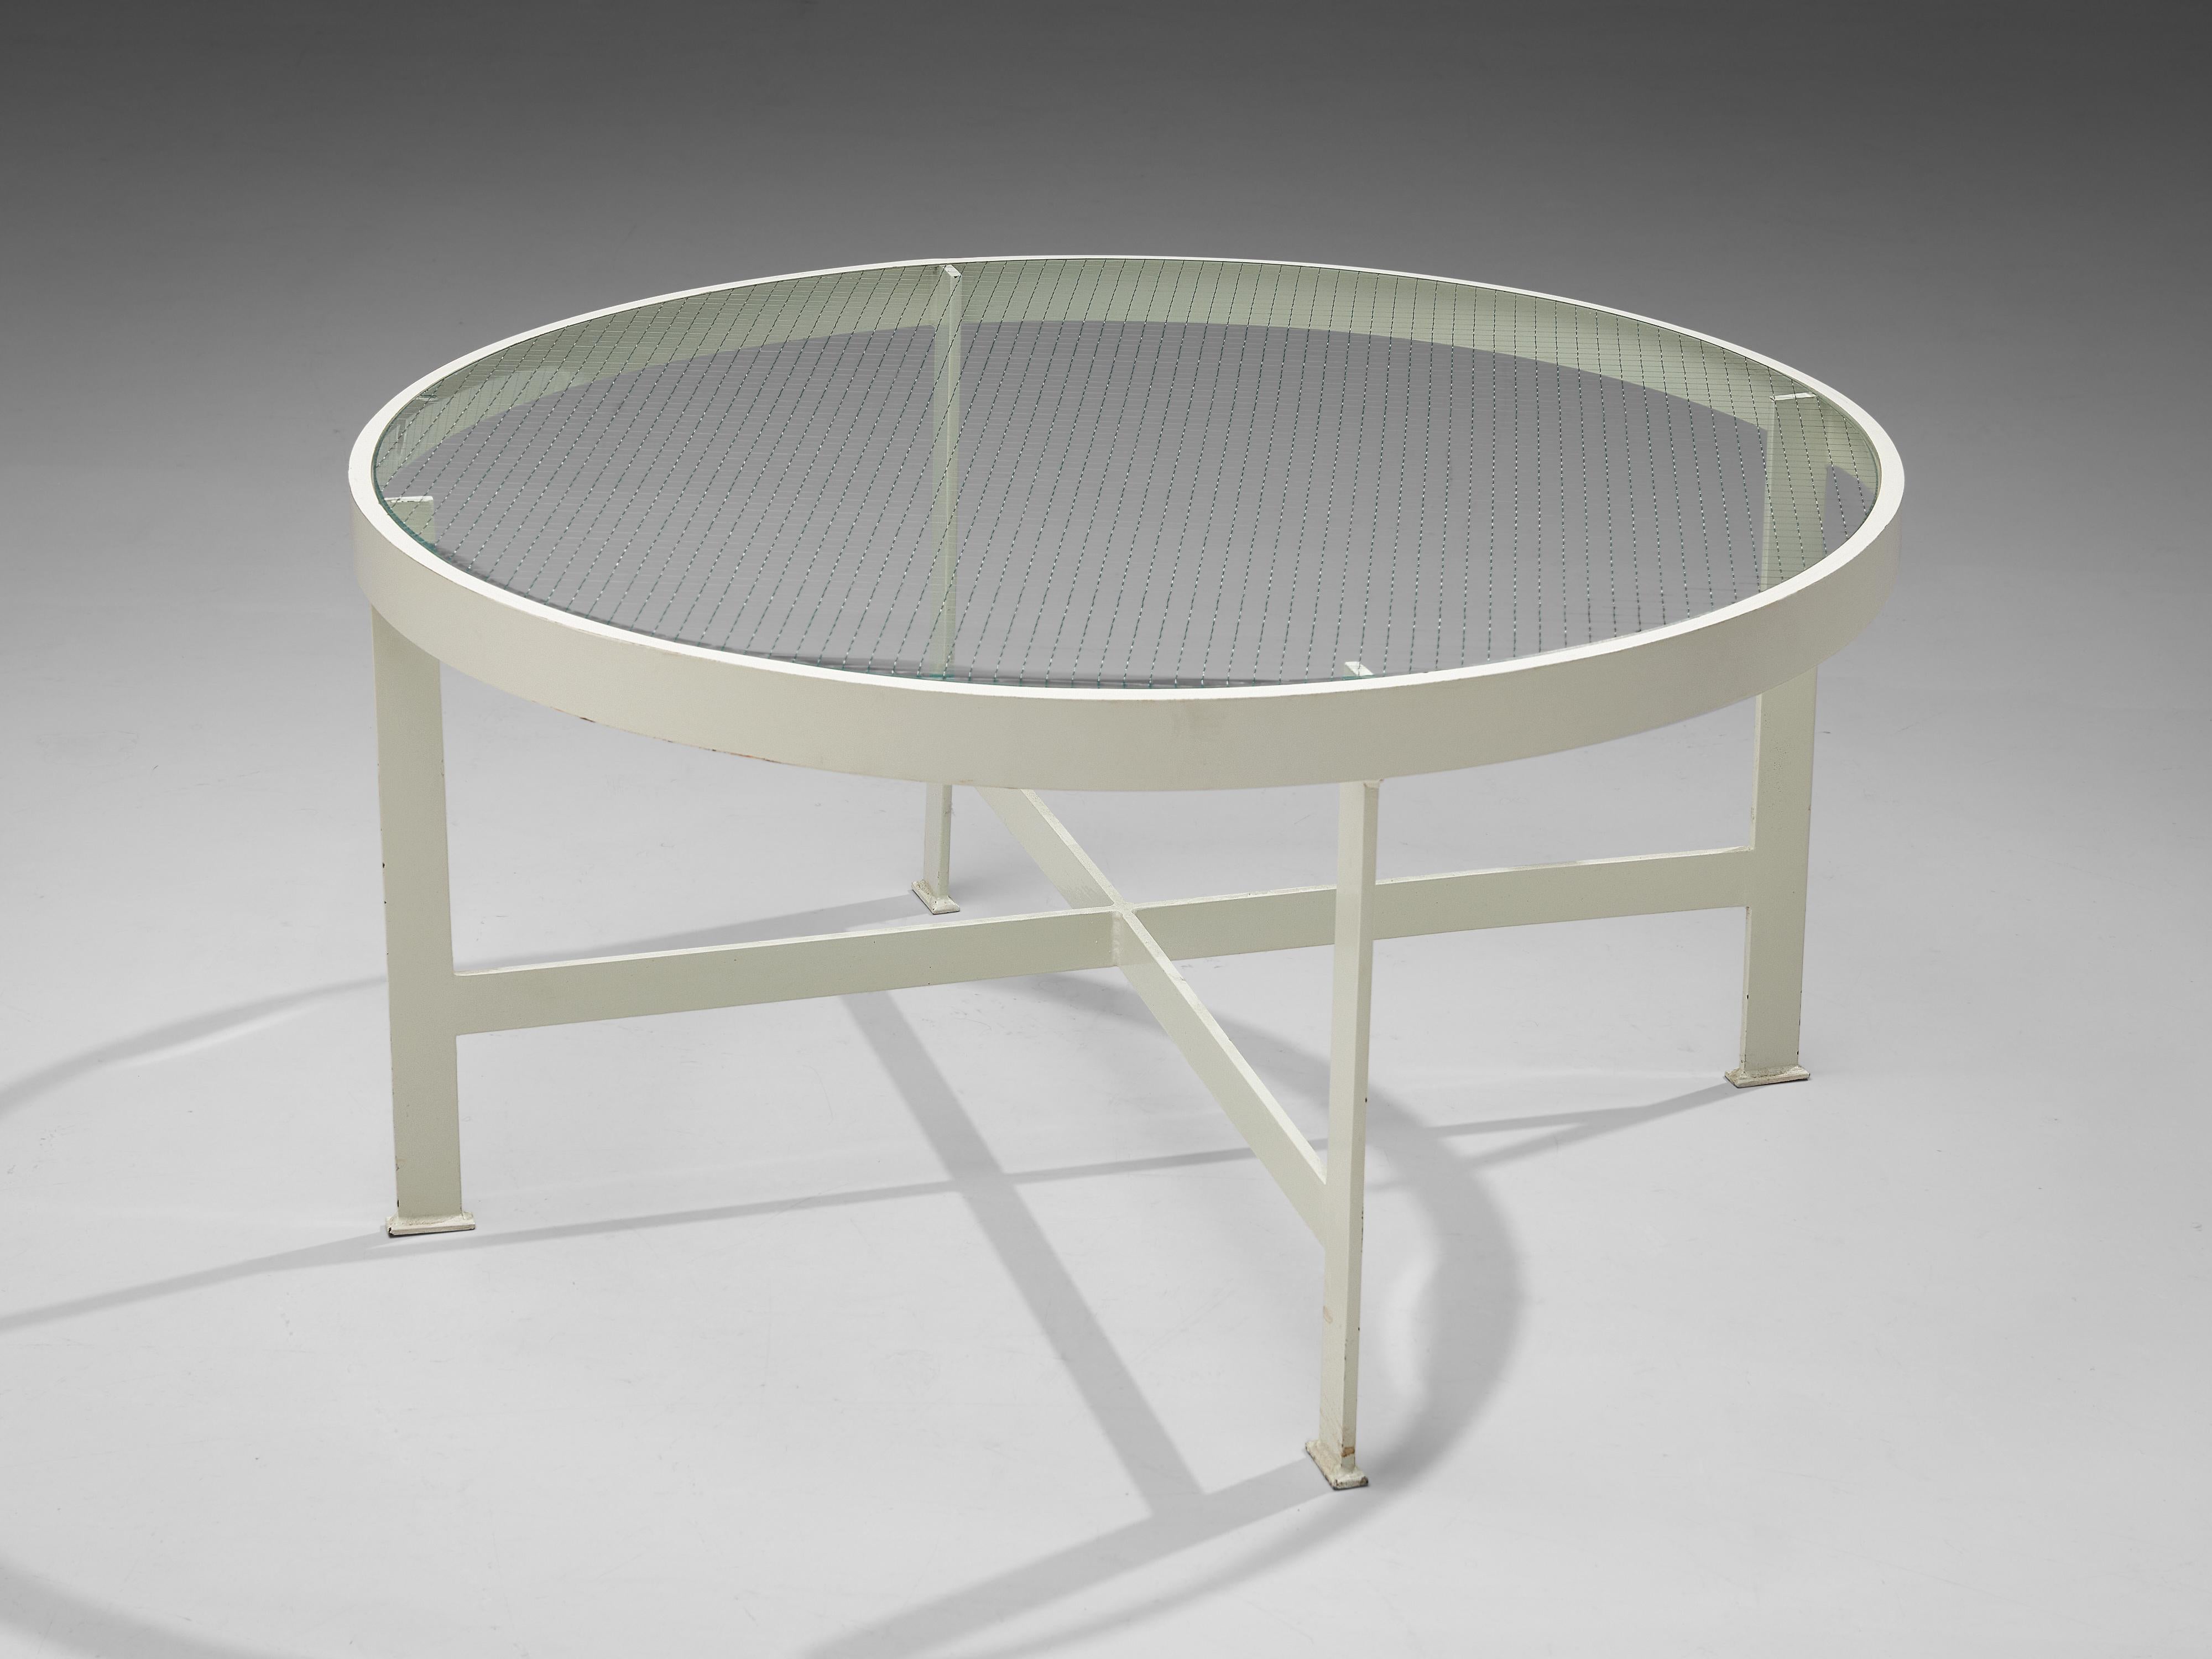 Janni Van Pelt, coffee table, glass and white metal, the Netherlands, circa 1958.

Round coffee table in white coated metal and glass designed by Janni van Pelt. This table is a variation on model G4. The base consists of four legs with a